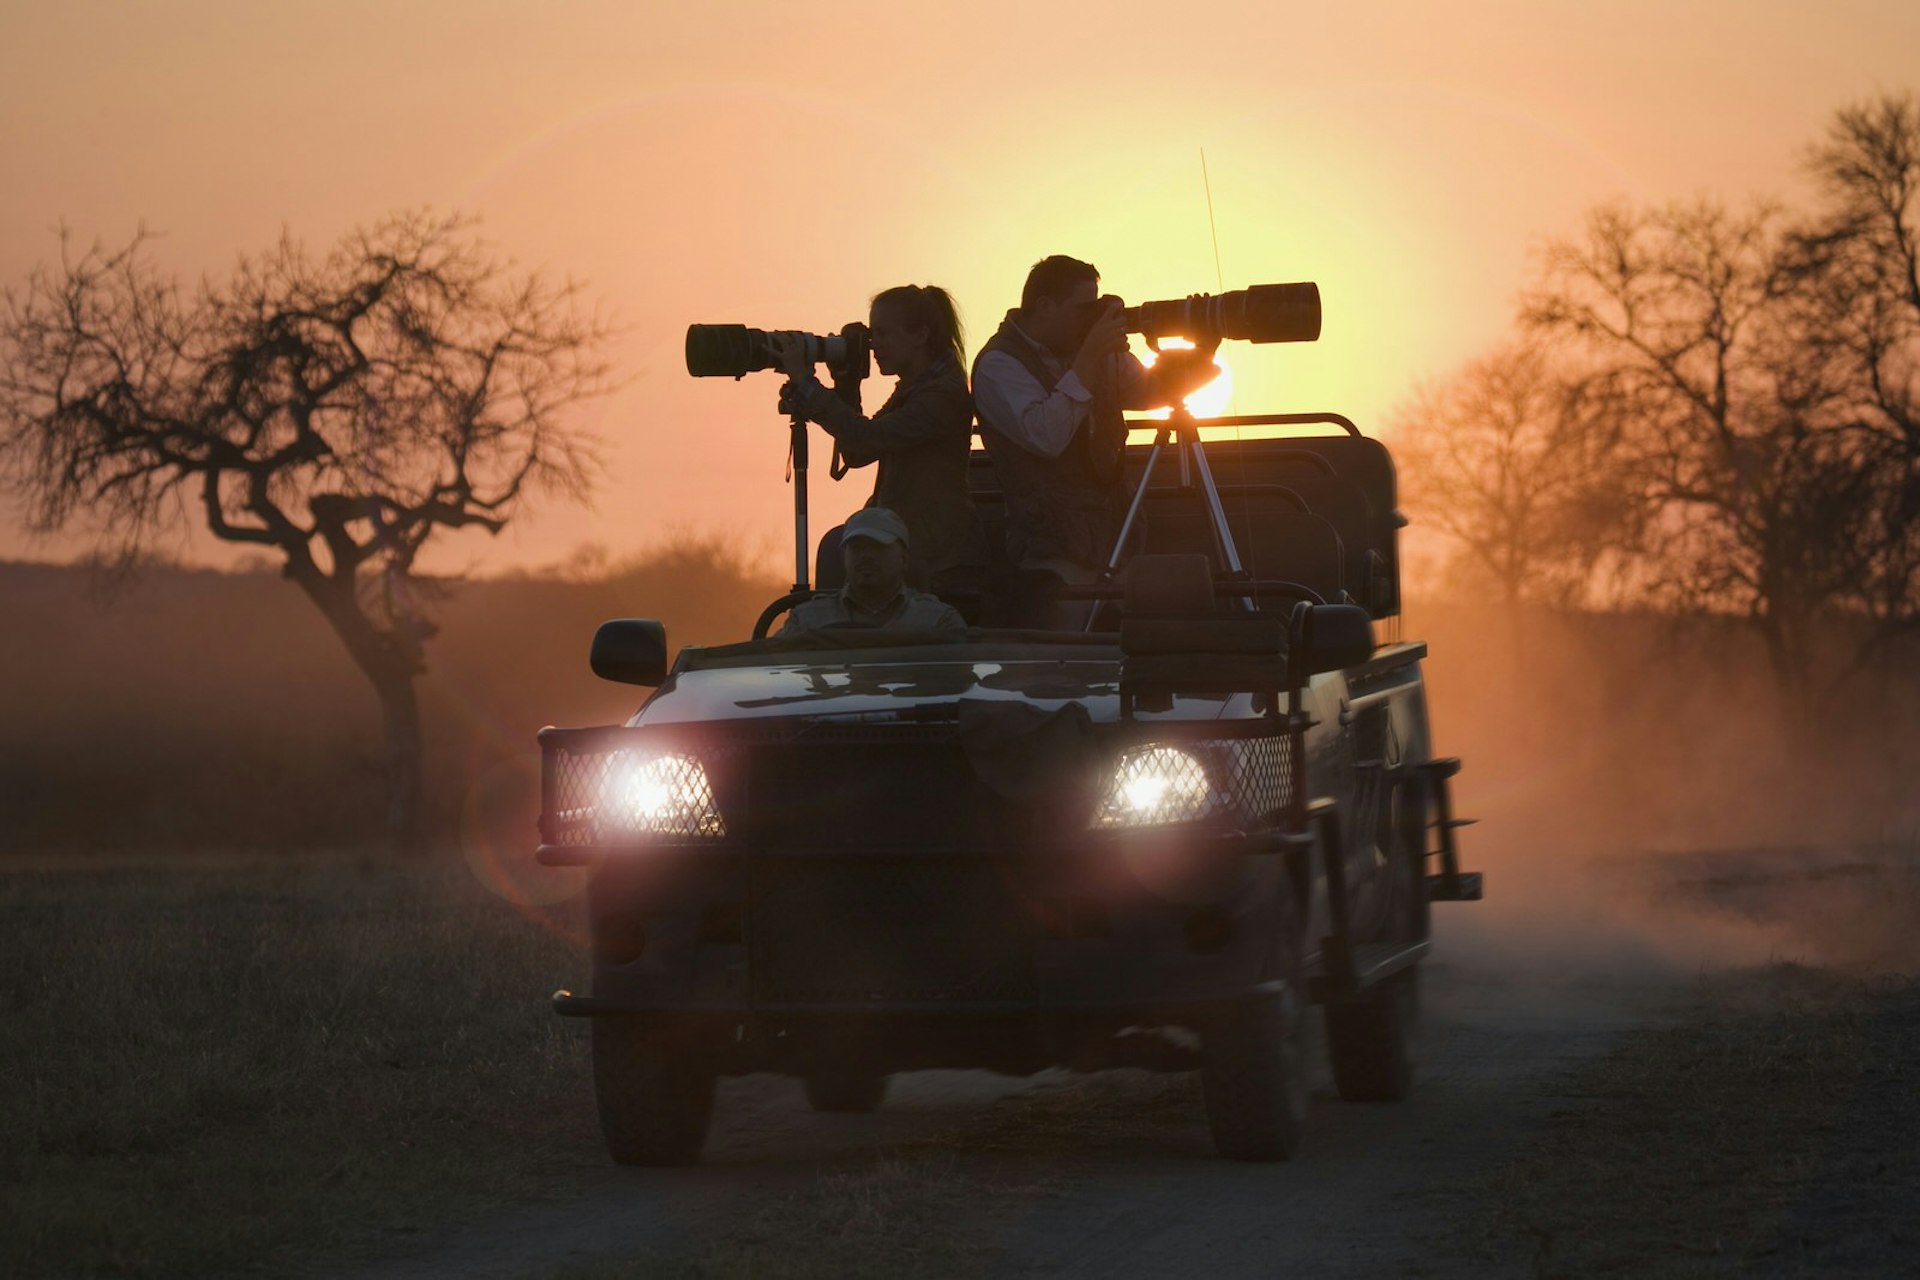 A man and woman take photos from a safari jeep at sunset.